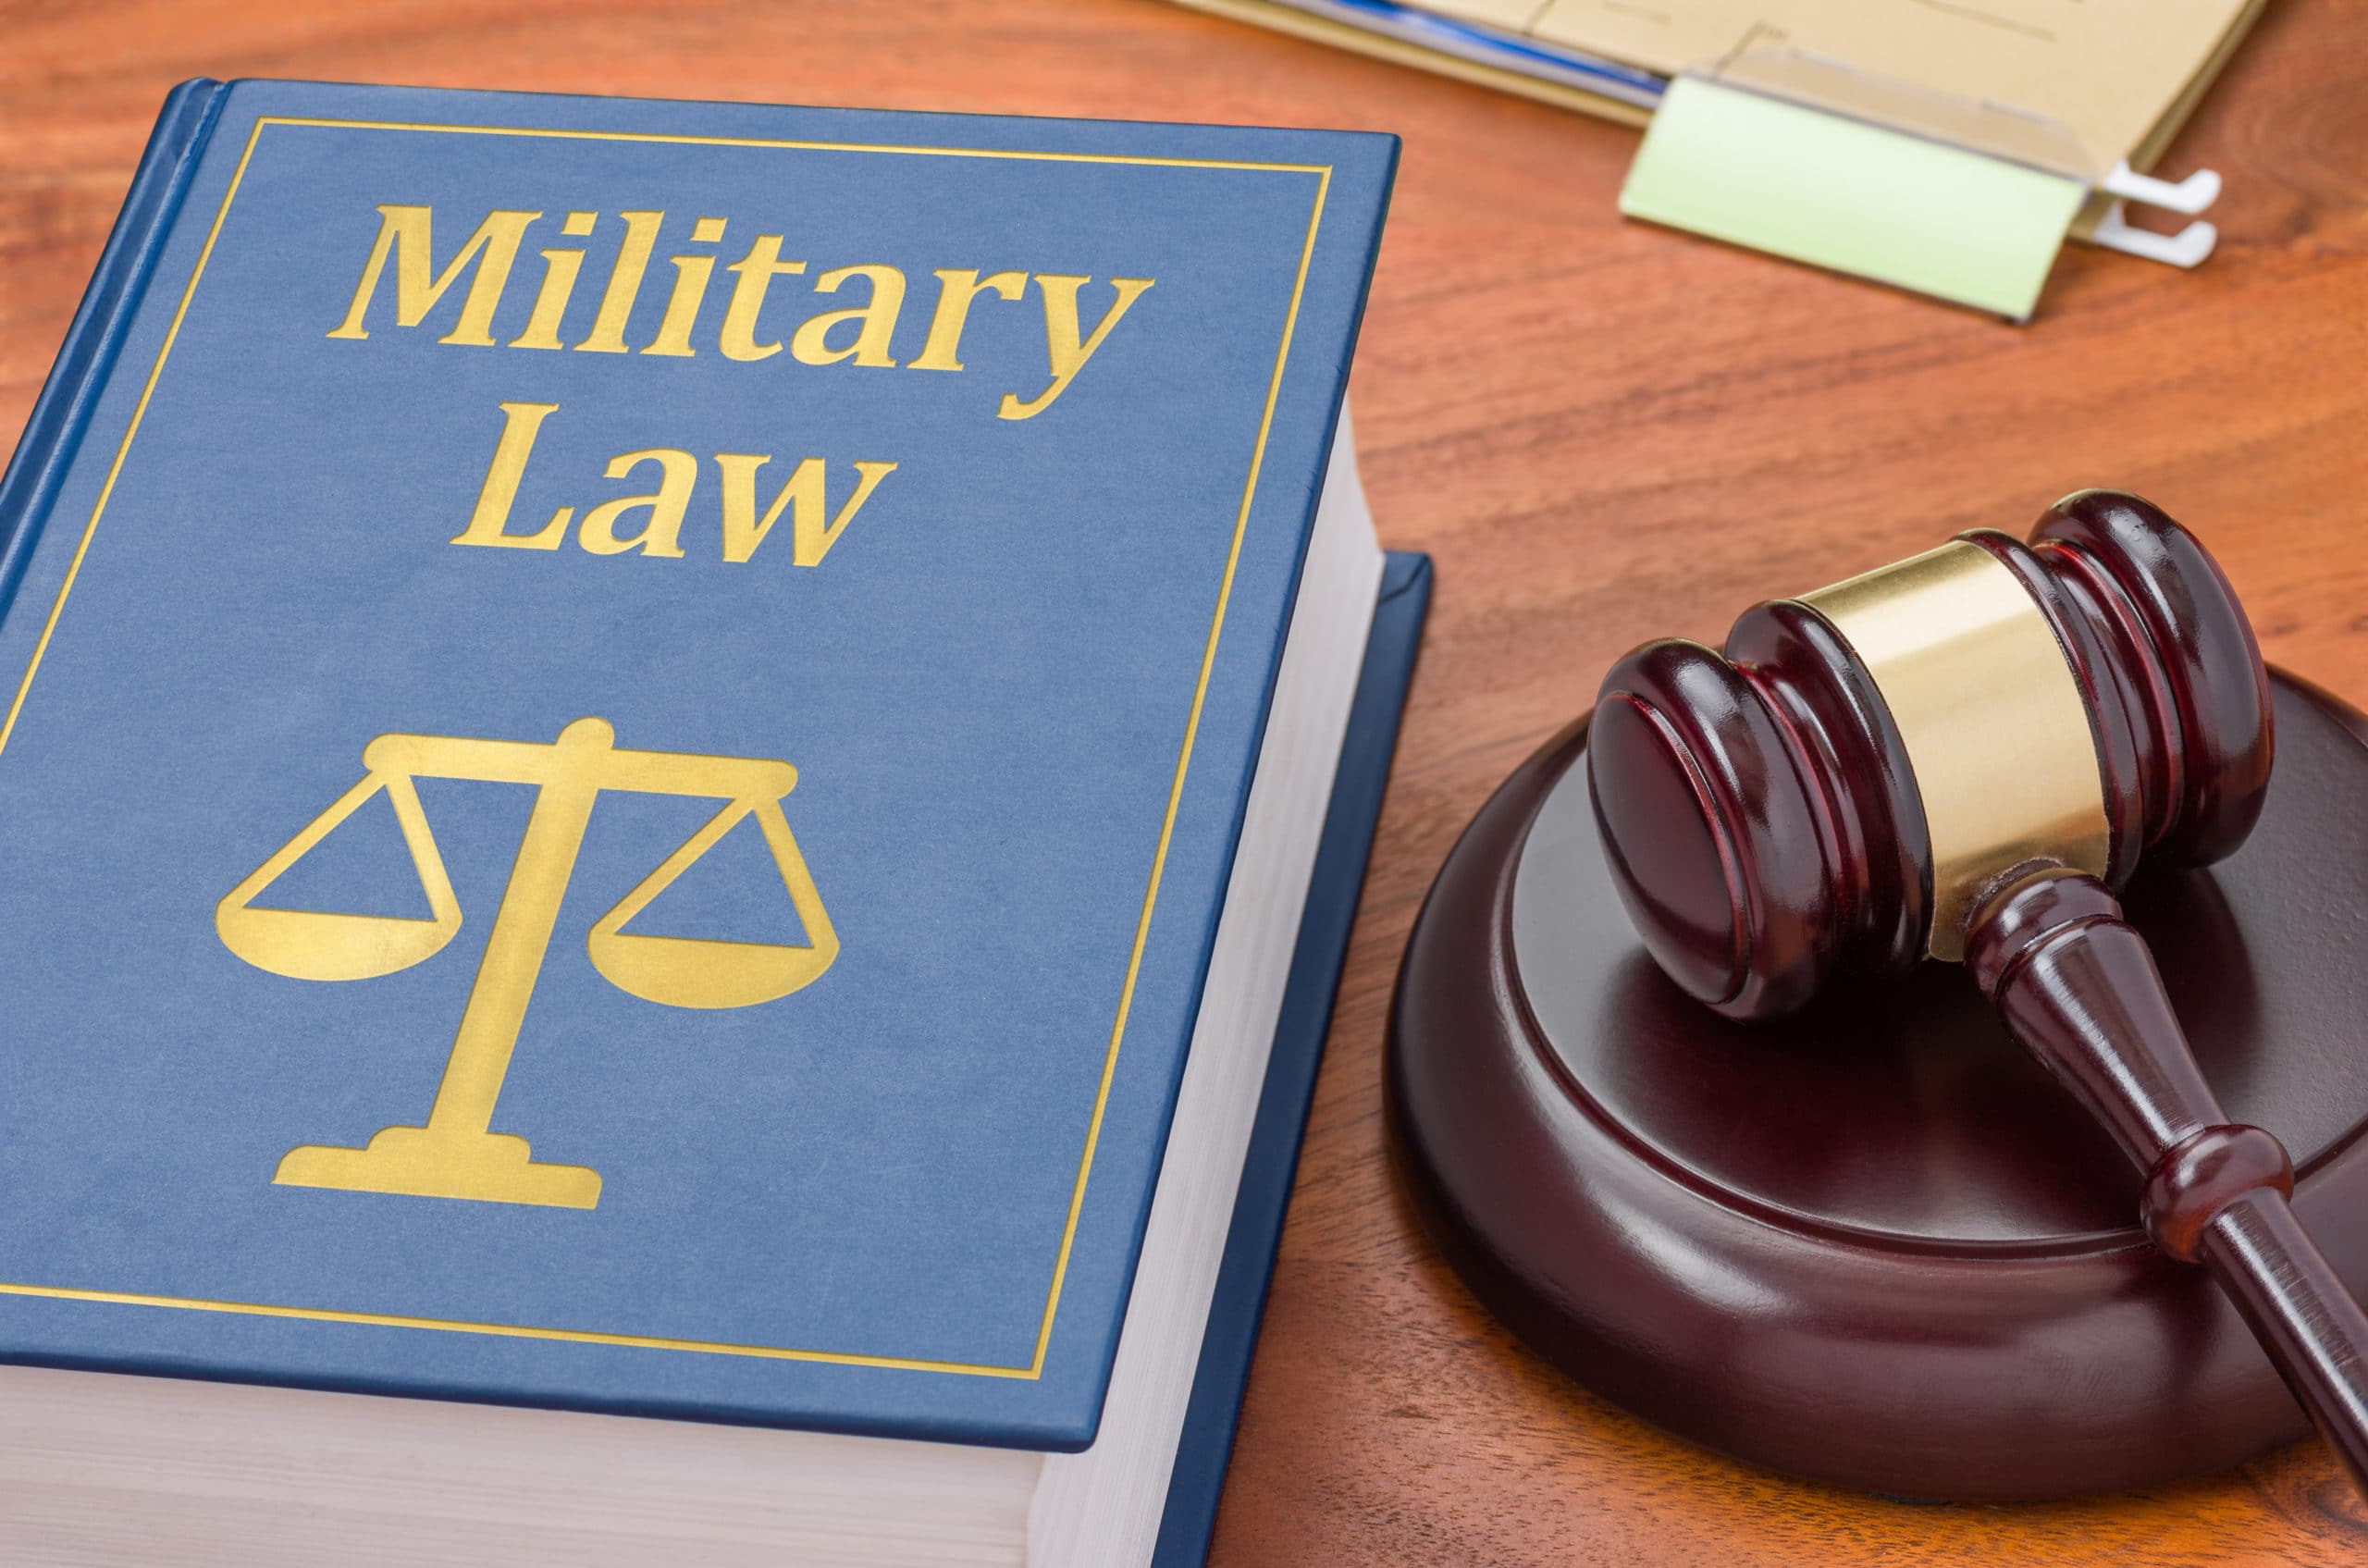 Militery law